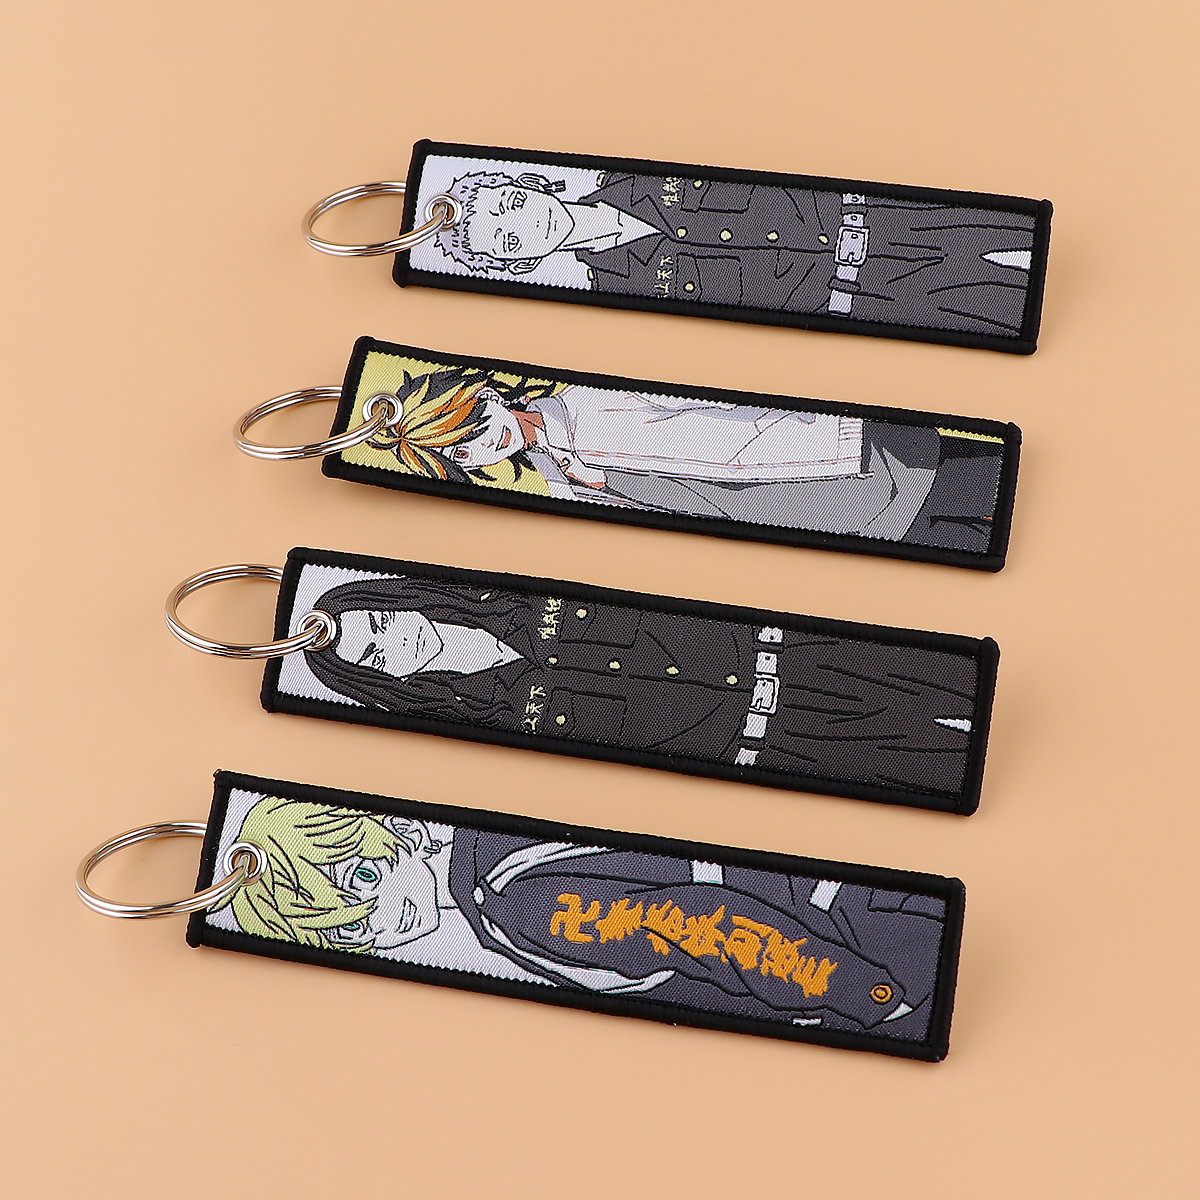 Japanese Anime Embroidered Keychain Key Tag Tokyo Revengers Key Fobs Motorcycles Cars Backpack Chaveiro Fashion Key 1 - Tokyo Revengers Merch